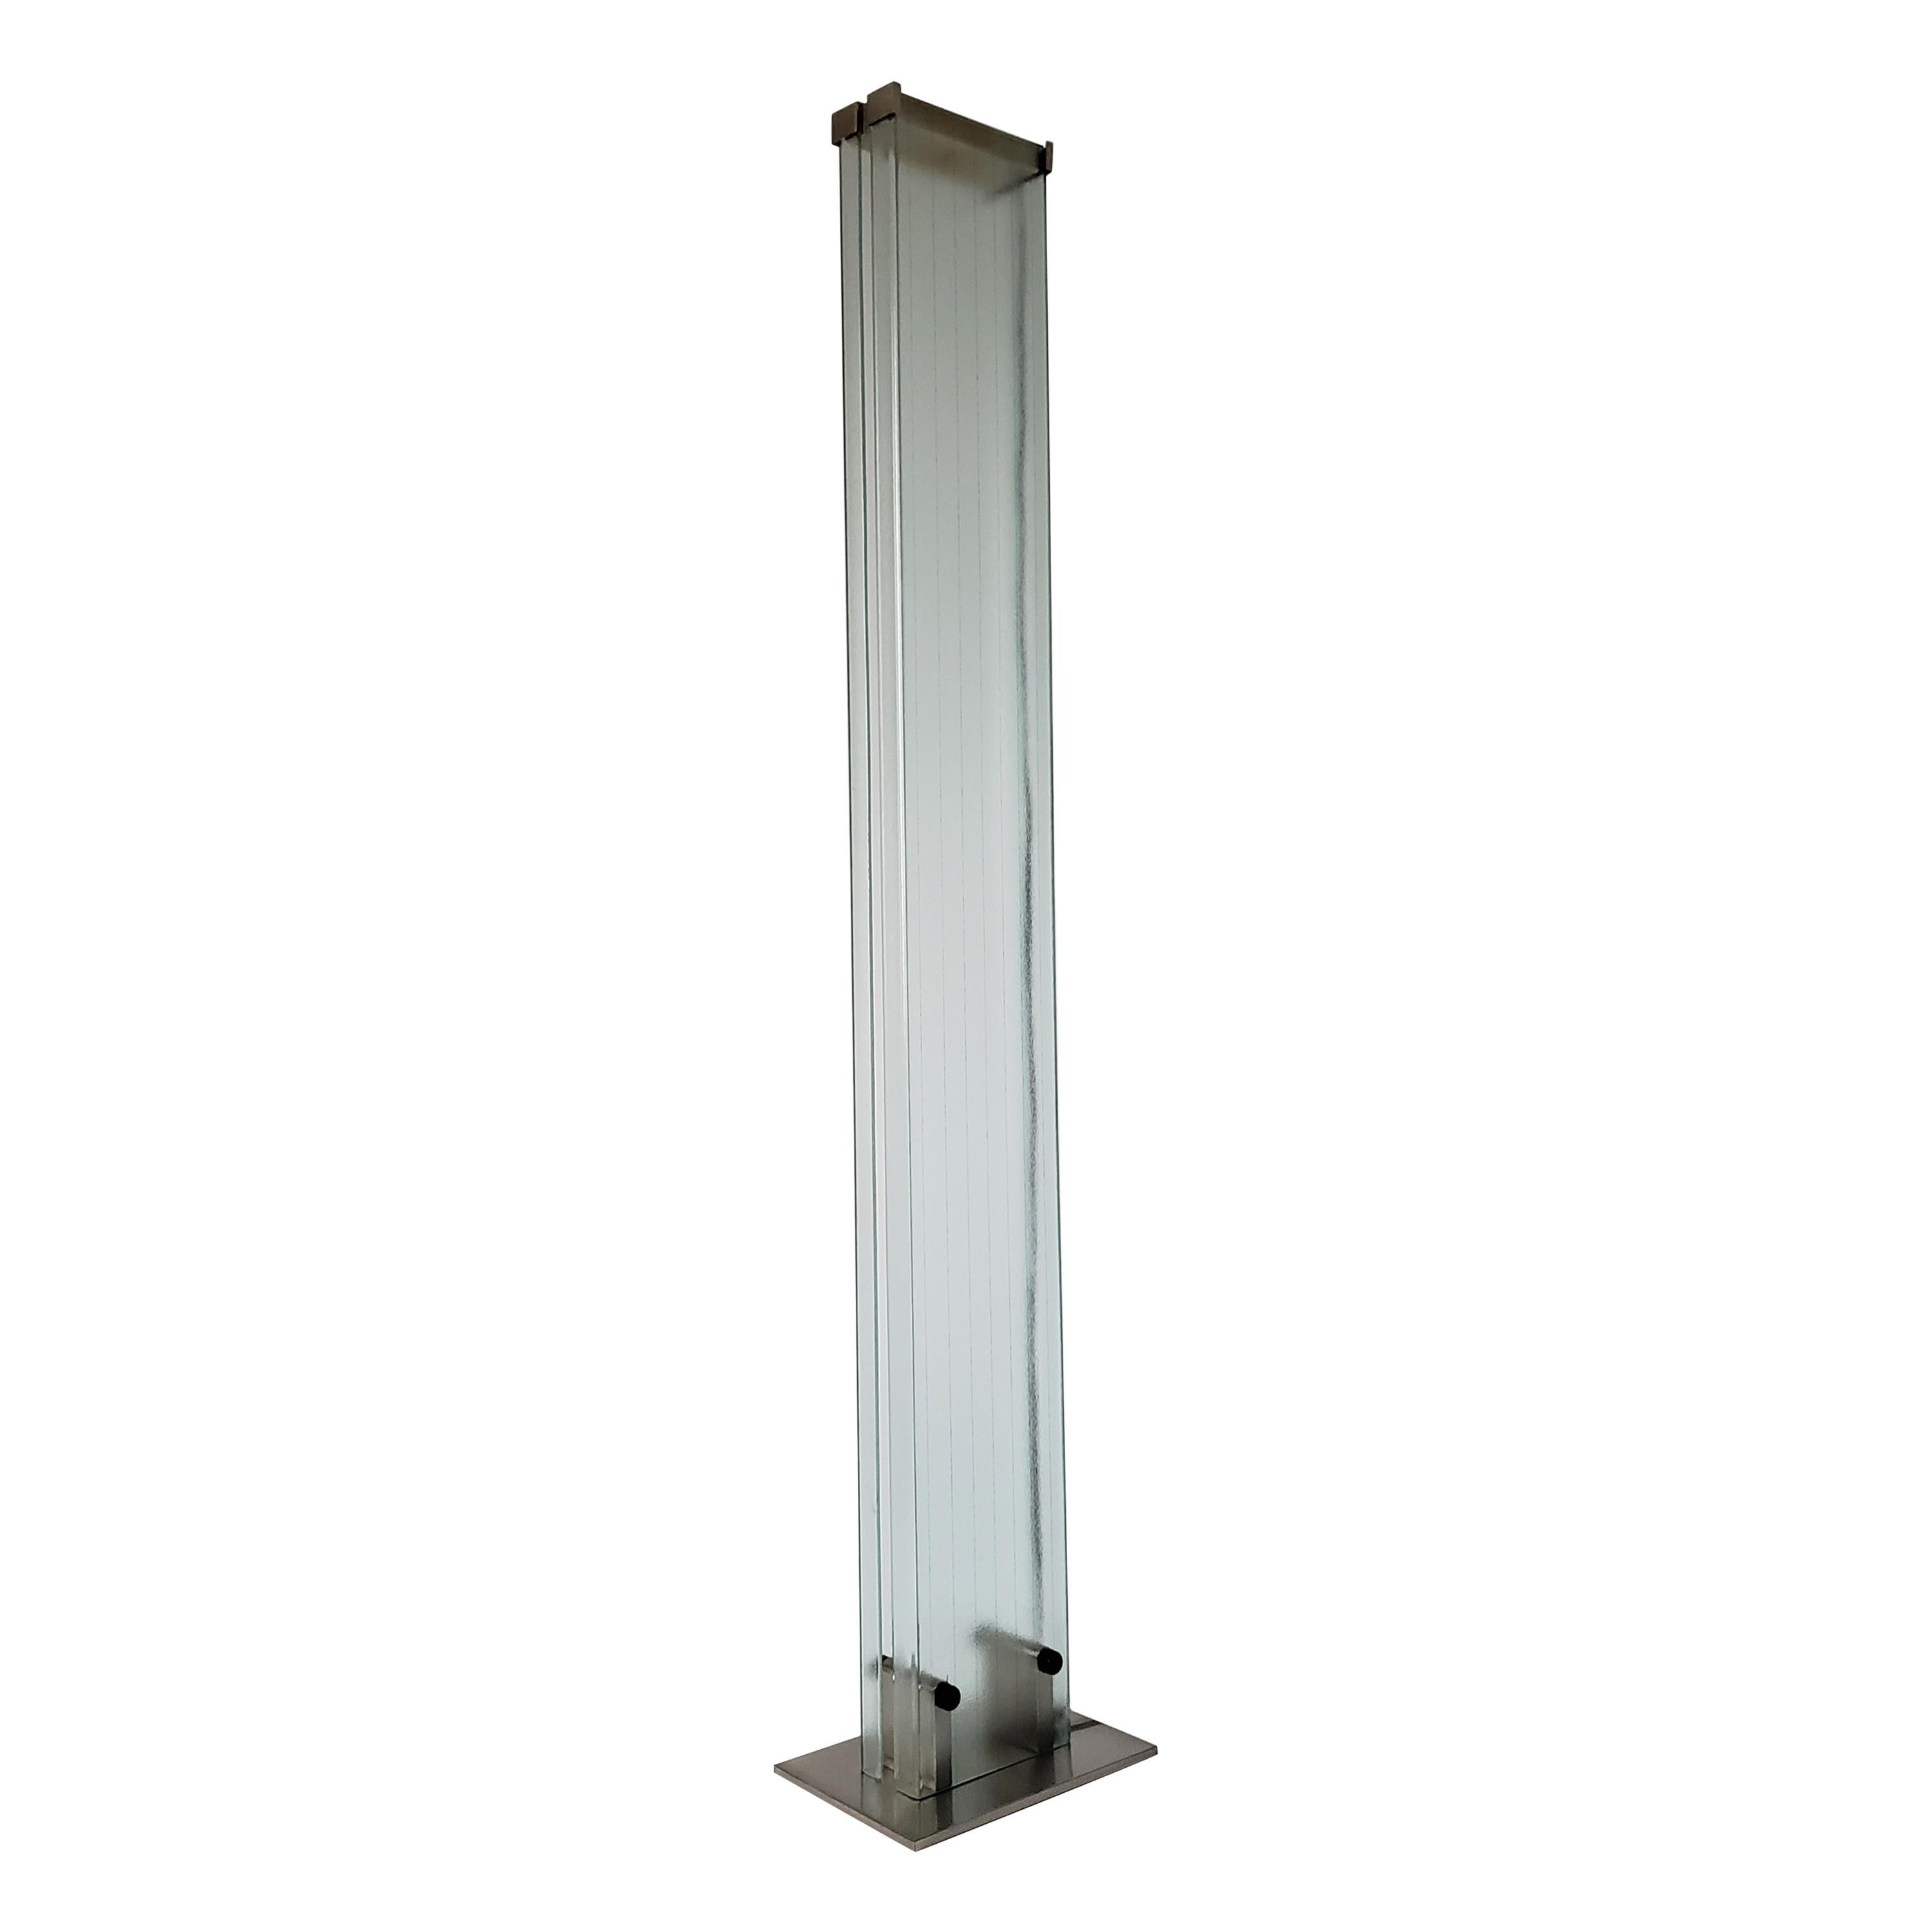 Minimalist powerfull halogen torchiere made of texturized tempered glass and lacquered stainless steel . 

Each glass piece measure 71 in. high by 9 in. wide .

Stainless steel base measure 14 in. wide by 9.5 in. deep .

Rated at 500 watt .